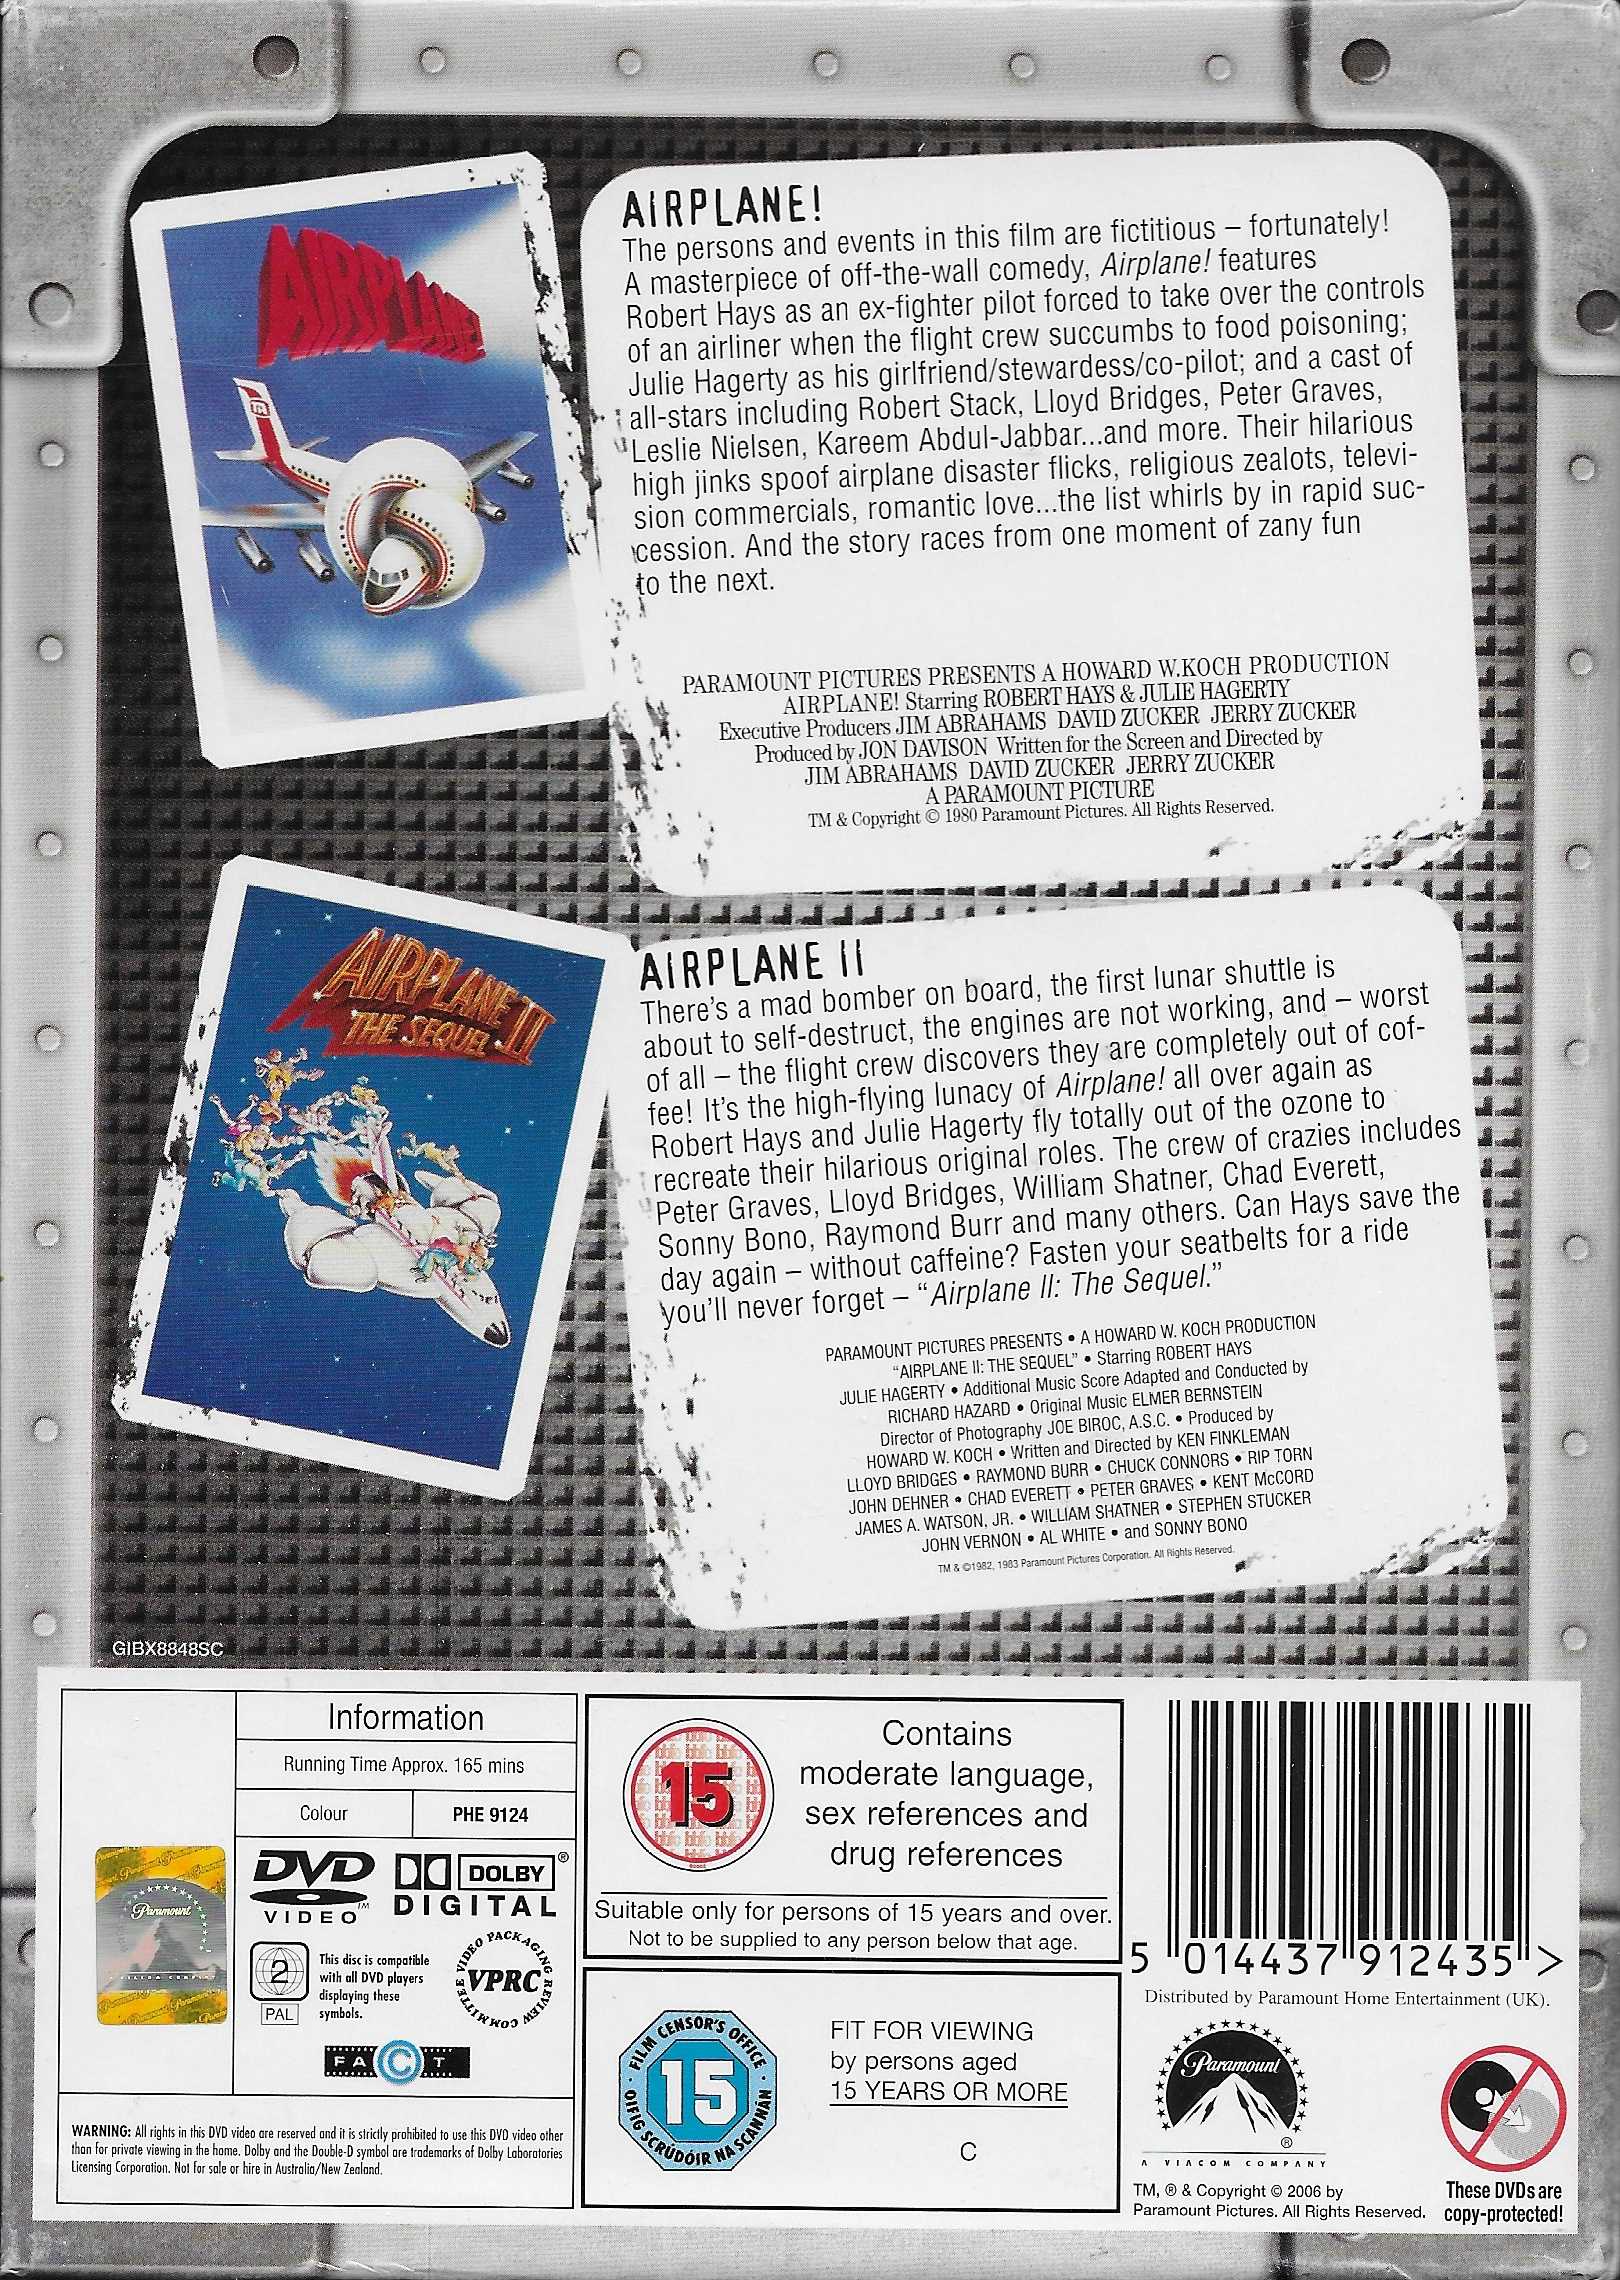 Back cover of PHE 9124